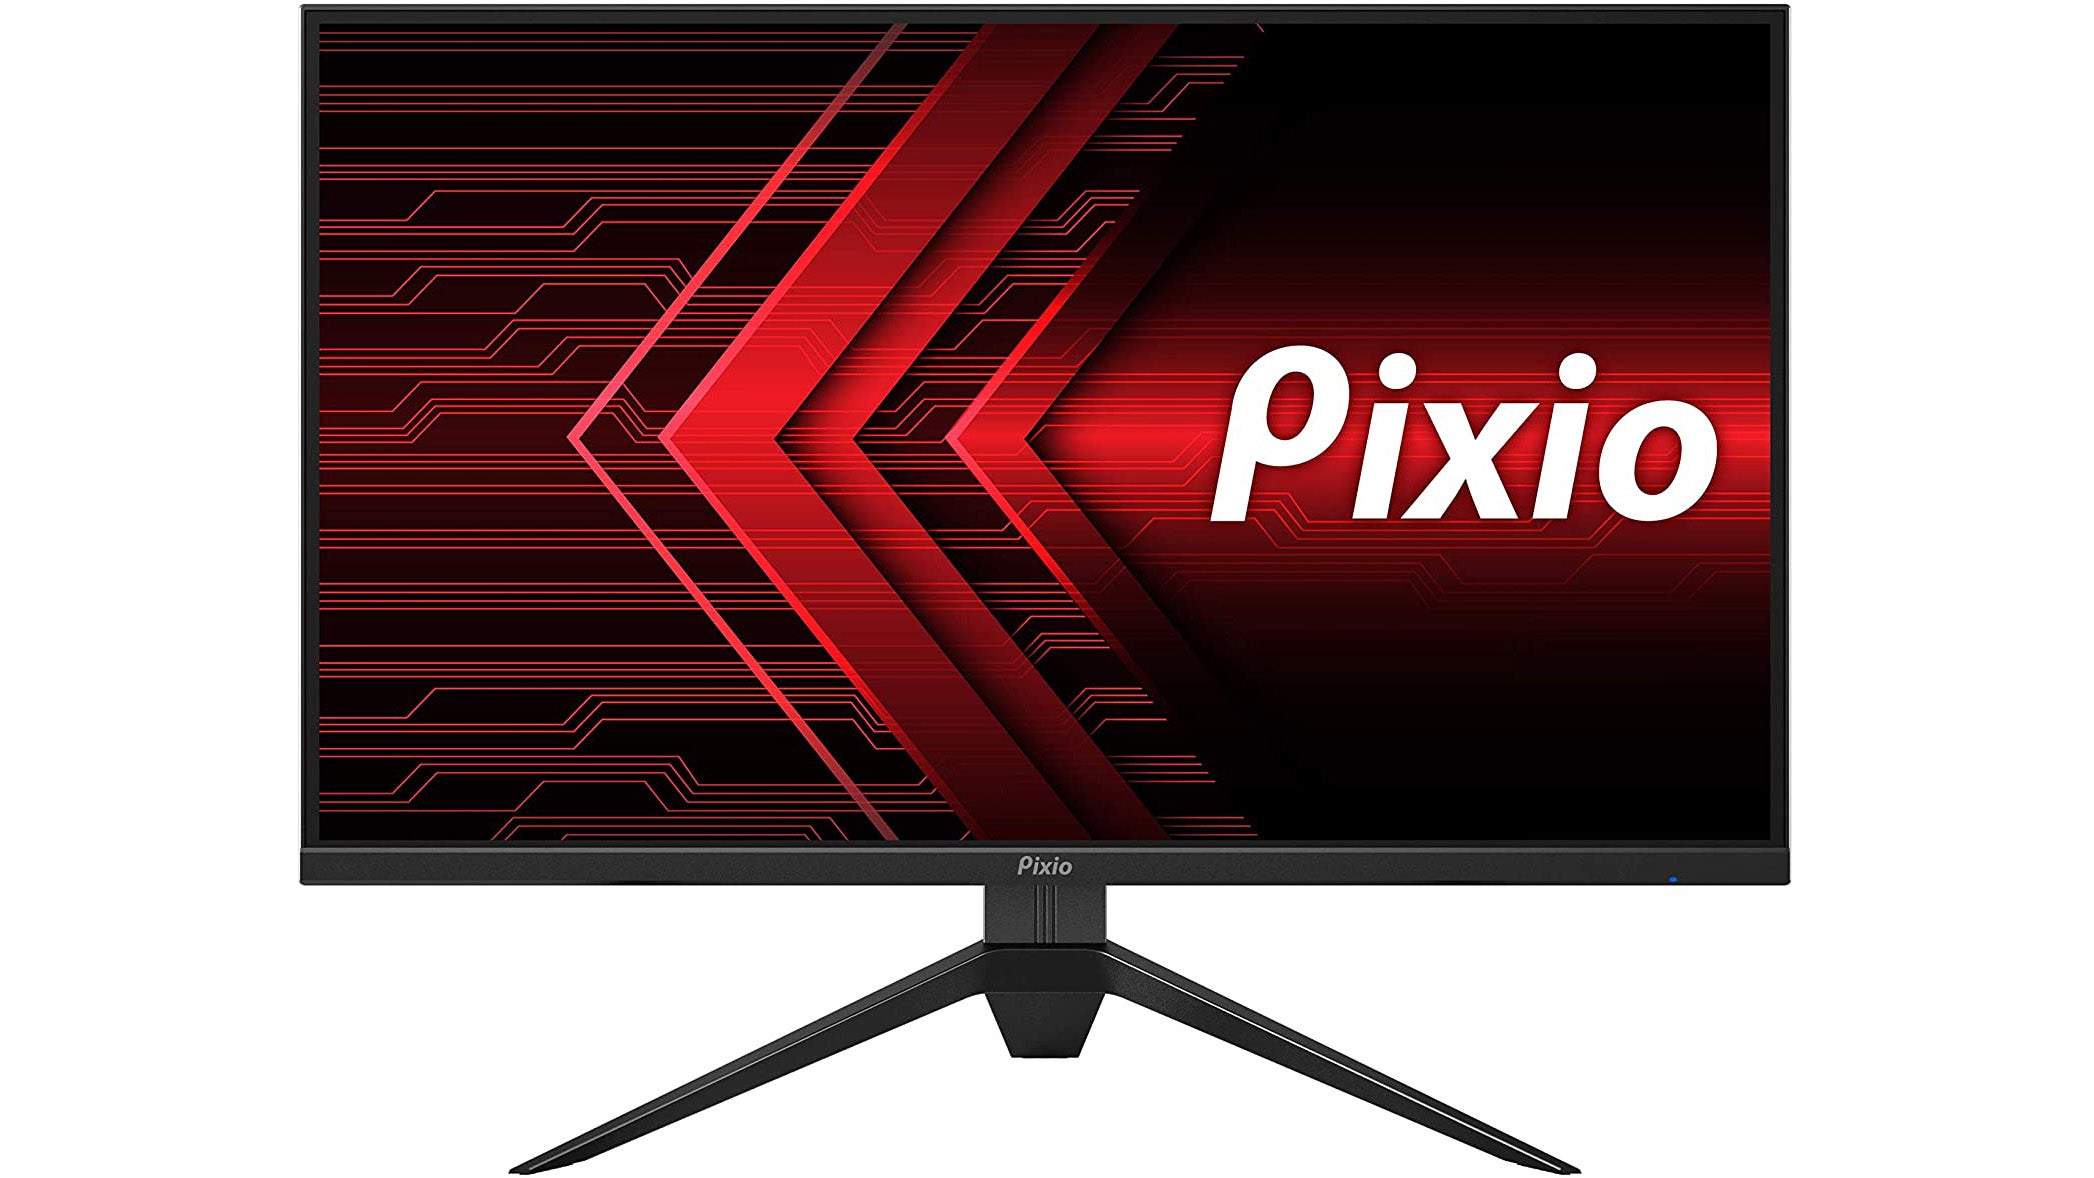 Image for Get a 27-in 1440p 165Hz gaming monitor for $240 after an Amazon discount